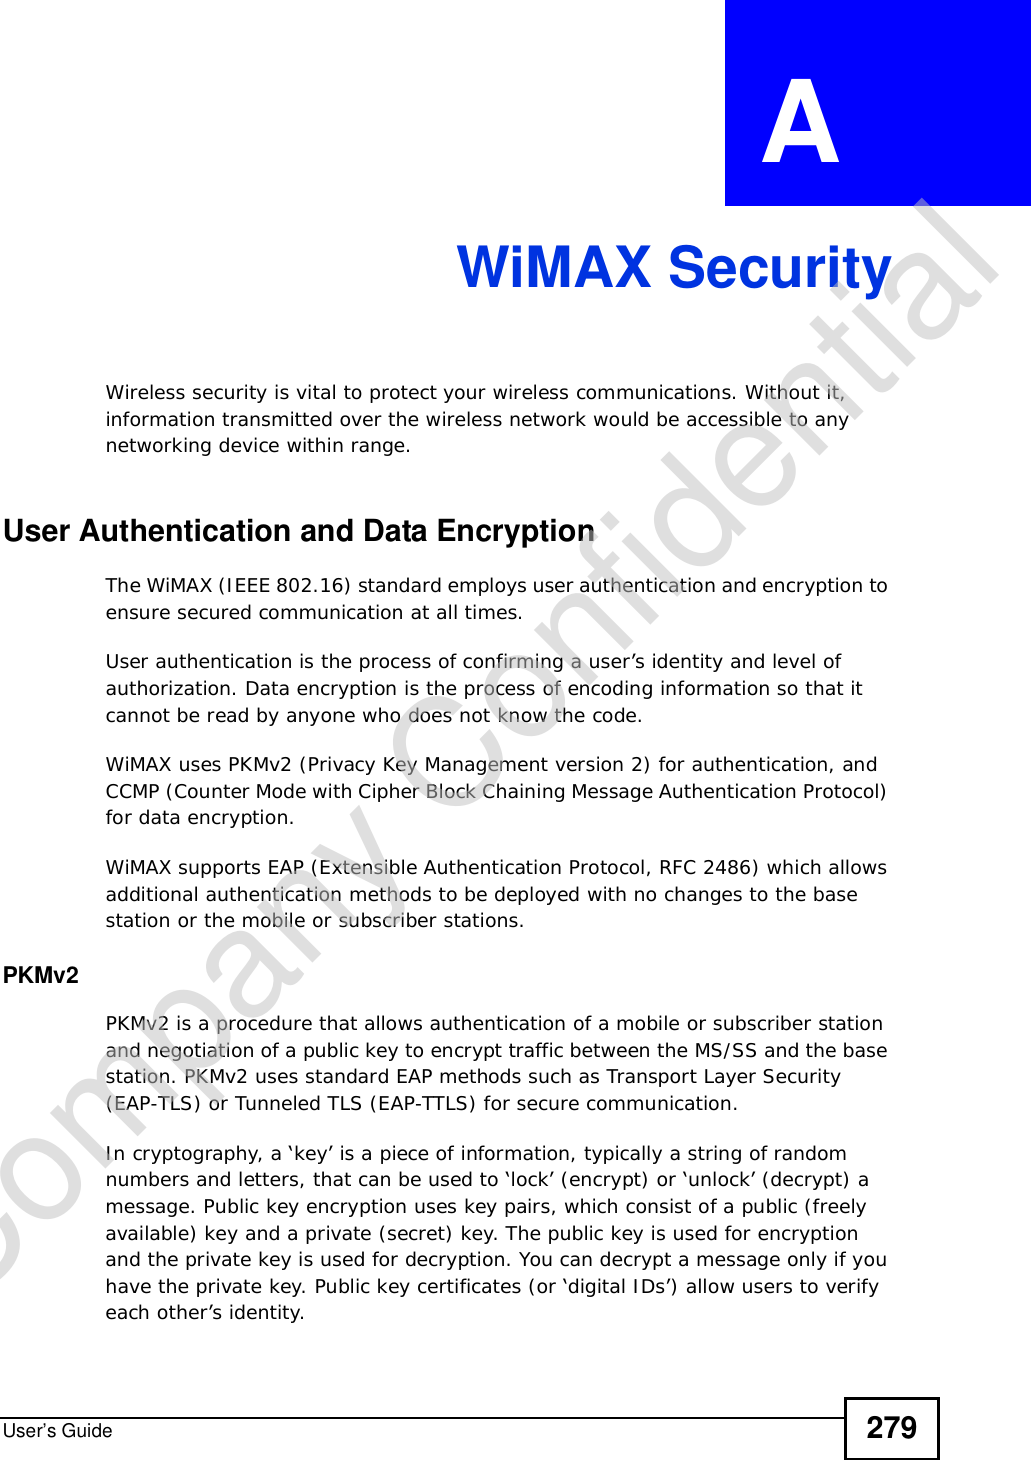 User’s Guide 279APPENDIX  A WiMAX SecurityWireless security is vital to protect your wireless communications. Without it, information transmitted over the wireless network would be accessible to any networking device within range.User Authentication and Data EncryptionThe WiMAX (IEEE 802.16) standard employs user authentication and encryption to ensure secured communication at all times.User authentication is the process of confirming a user’s identity and level of authorization. Data encryption is the process of encoding information so that it cannot be read by anyone who does not know the code. WiMAX uses PKMv2 (Privacy Key Management version 2) for authentication, and CCMP (Counter Mode with Cipher Block Chaining Message Authentication Protocol) for data encryption. WiMAX supports EAP (Extensible Authentication Protocol, RFC 2486) which allows additional authentication methods to be deployed with no changes to the base station or the mobile or subscriber stations.PKMv2PKMv2 is a procedure that allows authentication of a mobile or subscriber station and negotiation of a public key to encrypt traffic between the MS/SS and the base station. PKMv2 uses standard EAP methods such as Transport Layer Security (EAP-TLS) or Tunneled TLS (EAP-TTLS) for secure communication. In cryptography, a ‘key’ is a piece of information, typically a string of random numbers and letters, that can be used to ‘lock’ (encrypt) or ‘unlock’ (decrypt) a message. Public key encryption uses key pairs, which consist of a public (freely available) key and a private (secret) key. The public key is used for encryption and the private key is used for decryption. You can decrypt a message only if you have the private key. Public key certificates (or ‘digital IDs’) allow users to verify each other’s identity. Company Confidential